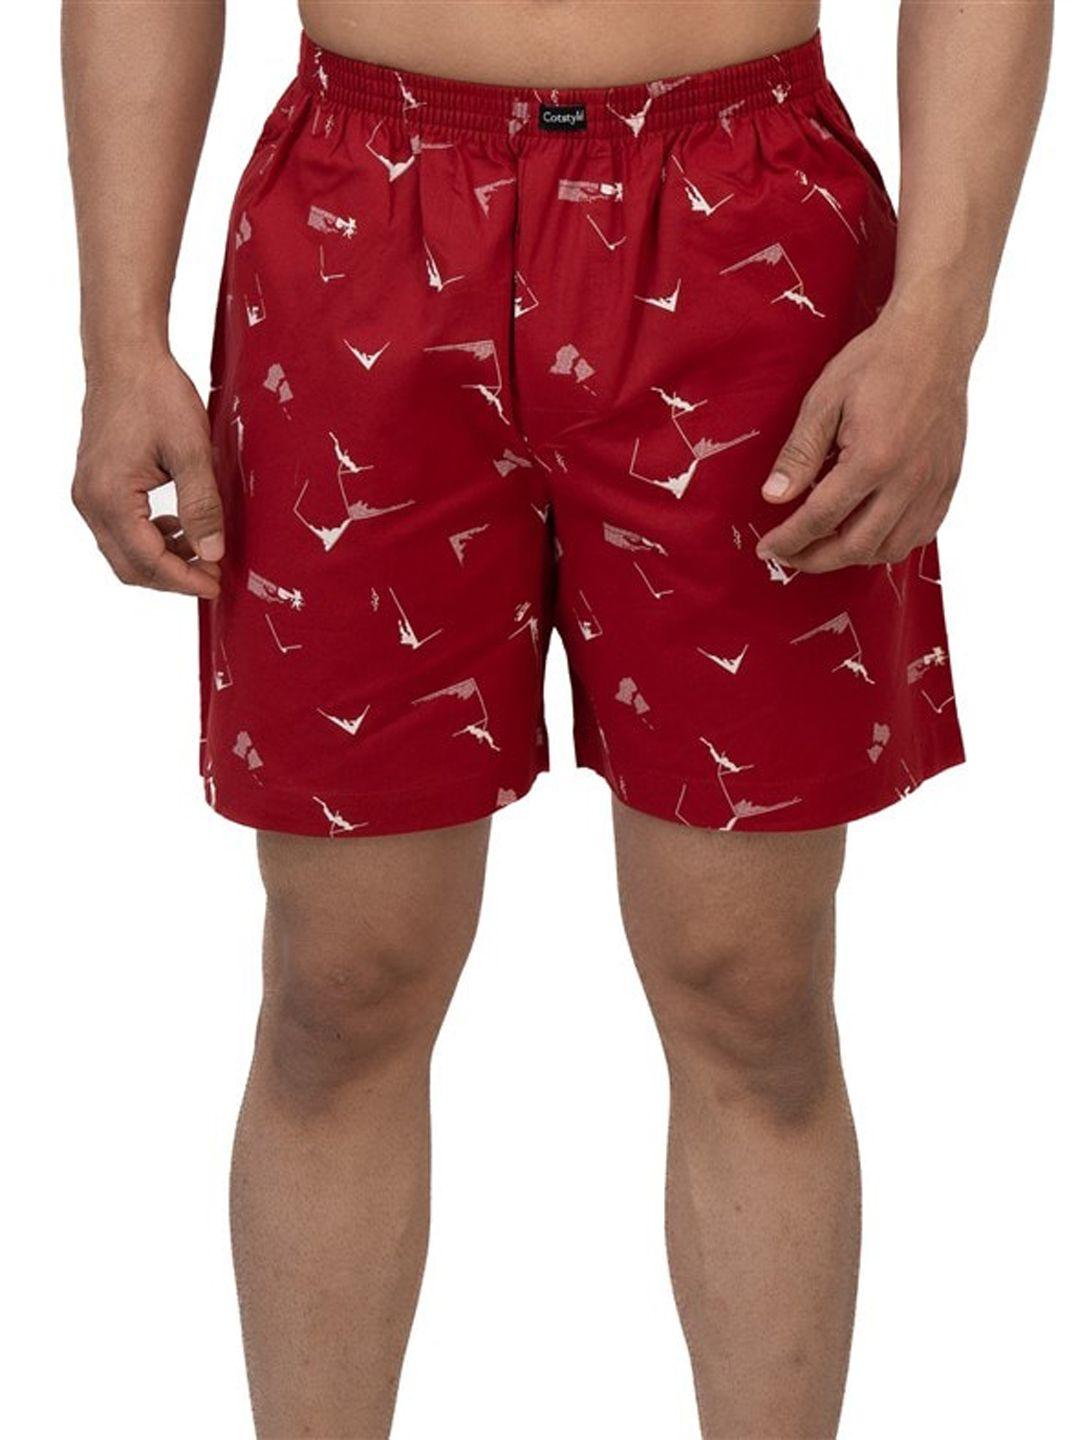 cotstyle printed pure cotton boxer bxr_1025_red-s